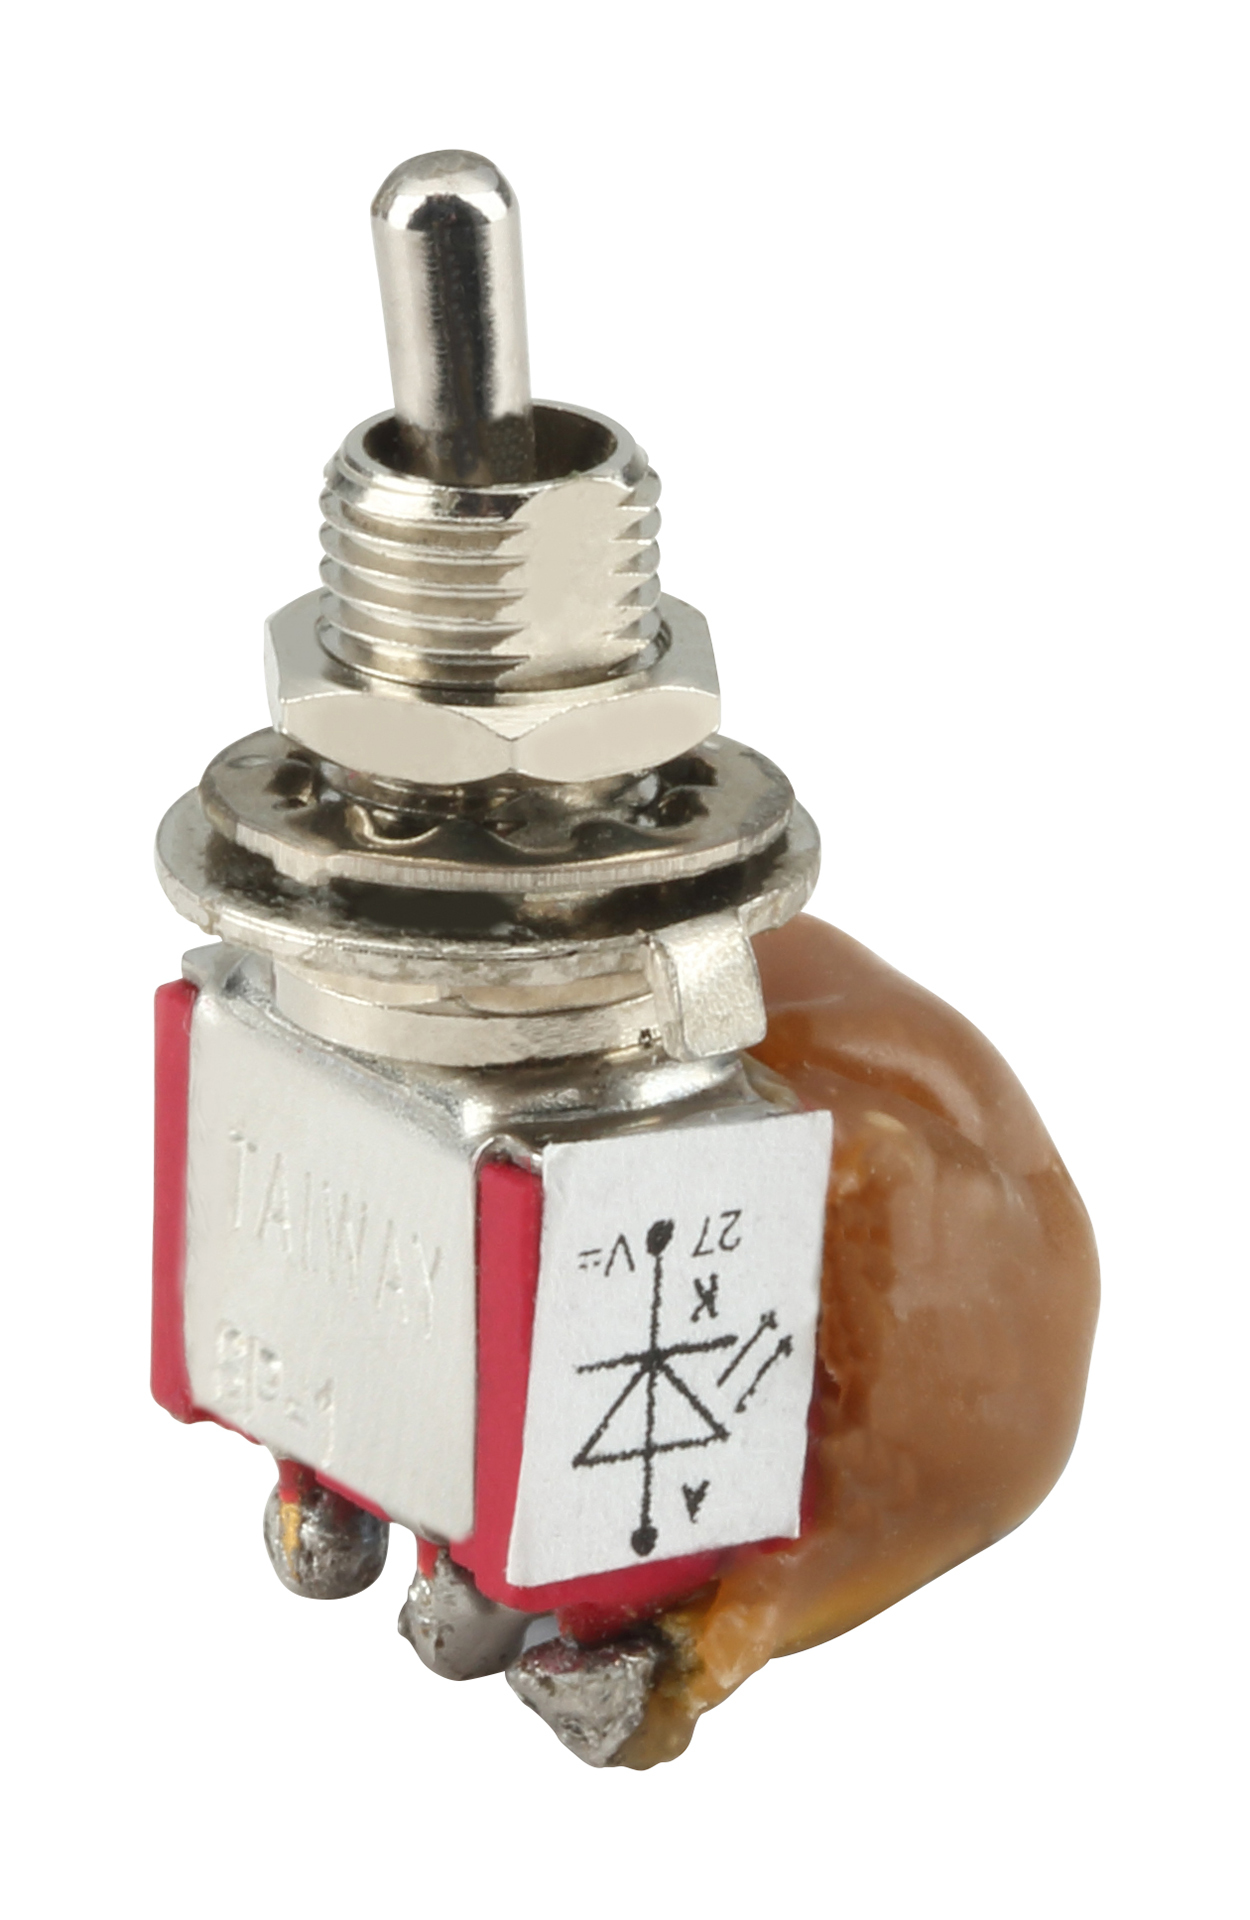 MEC LED Mini Toggle Switch Assembly, Short, Solder Lugs, with Trim Pot, ON/ON, SPDT - Chrome